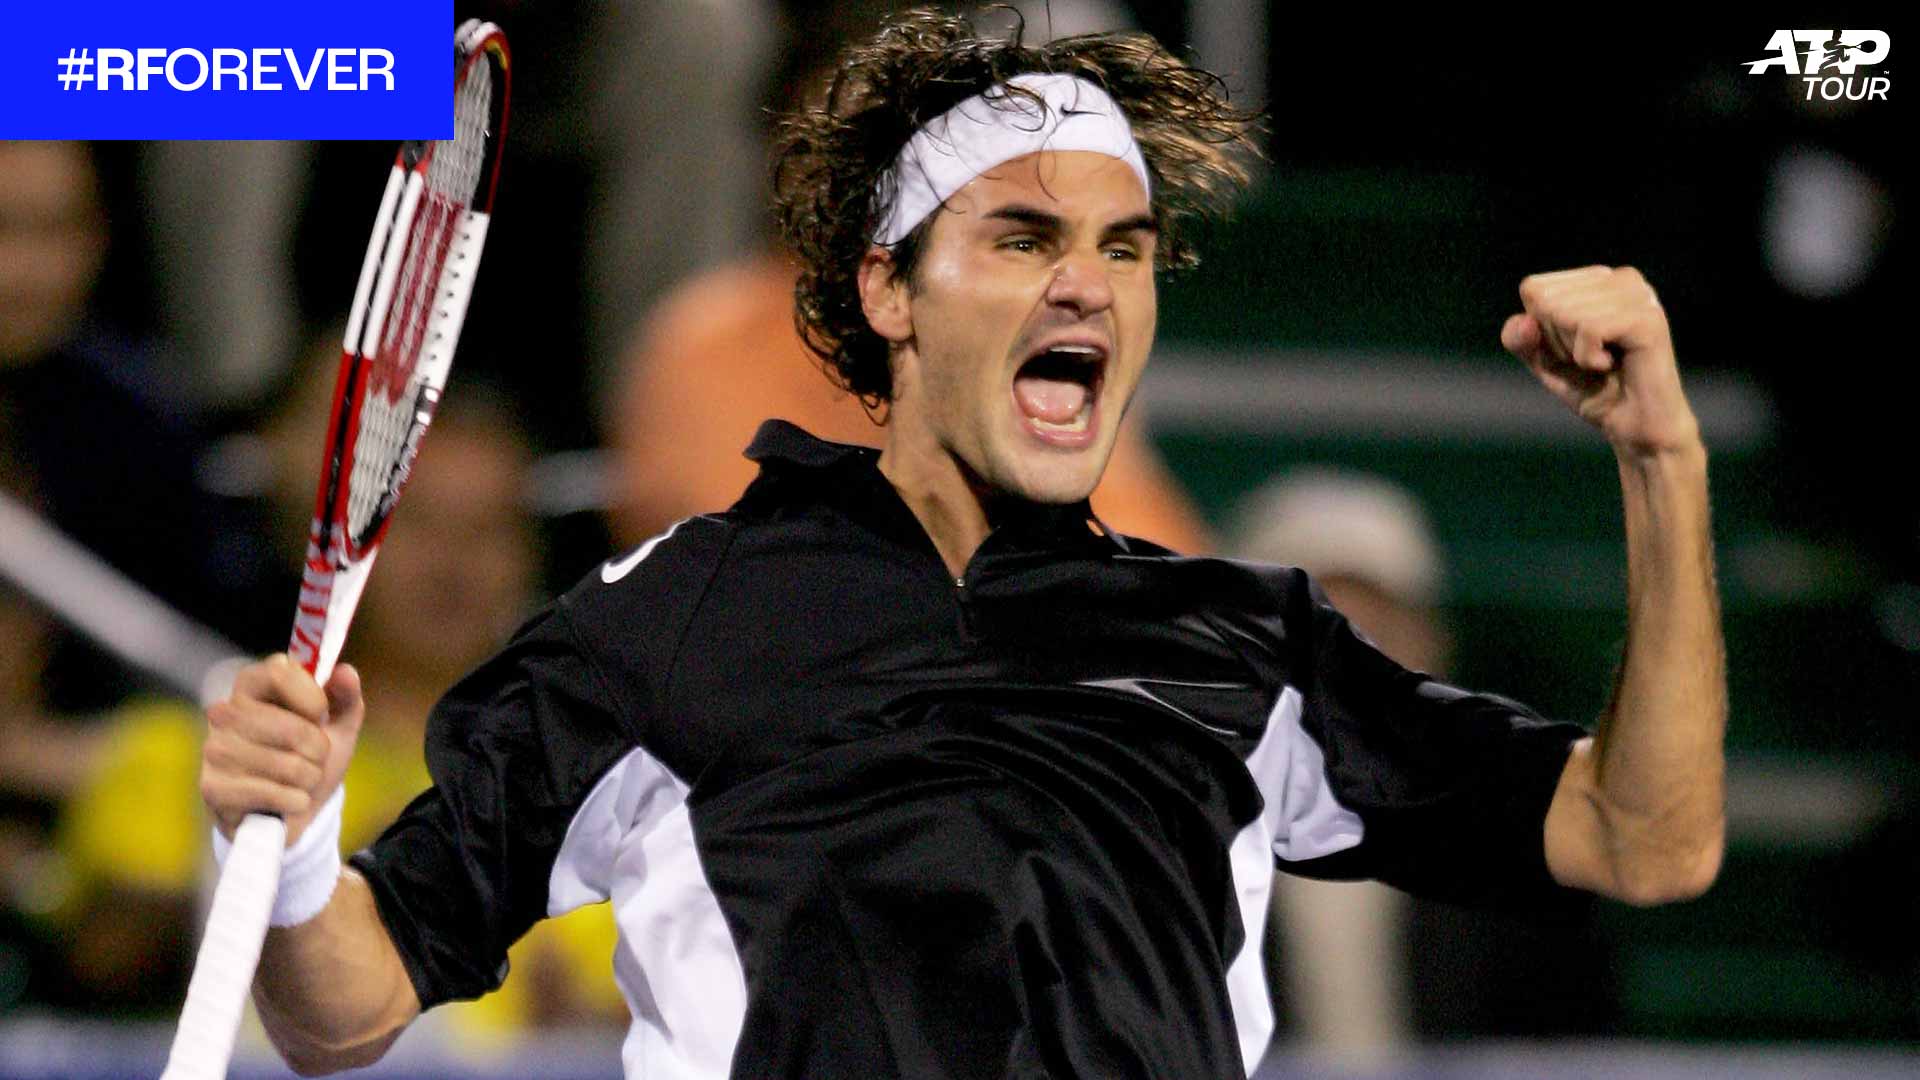 Roger Federer capped his outstanding 2004 season by winning a second consecutive Tennis Masters Cup title in Houston